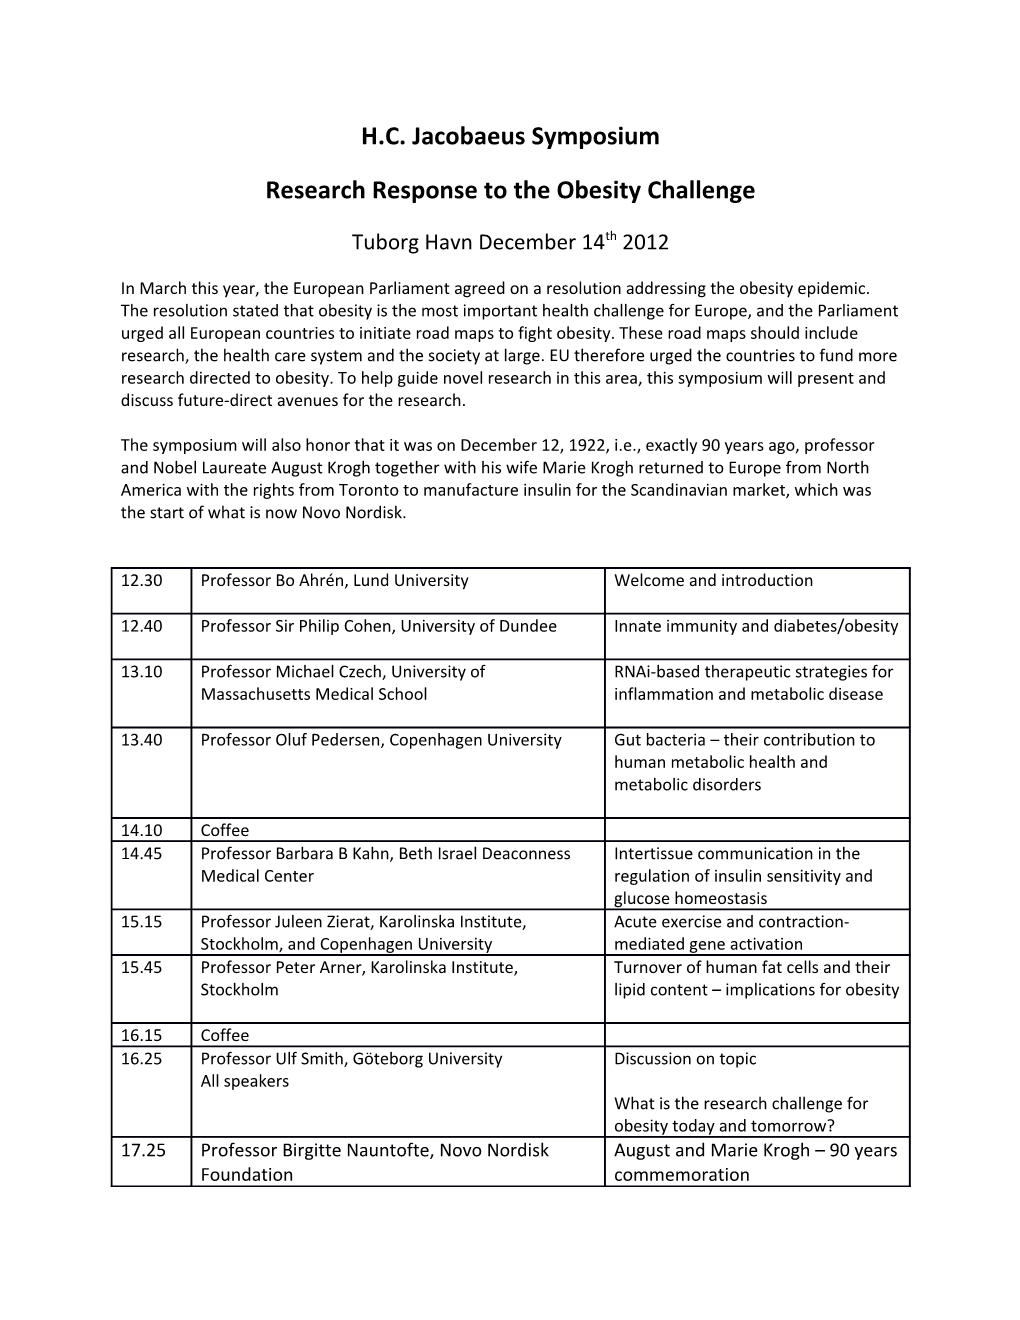 Research Response to the Obesity Challenge